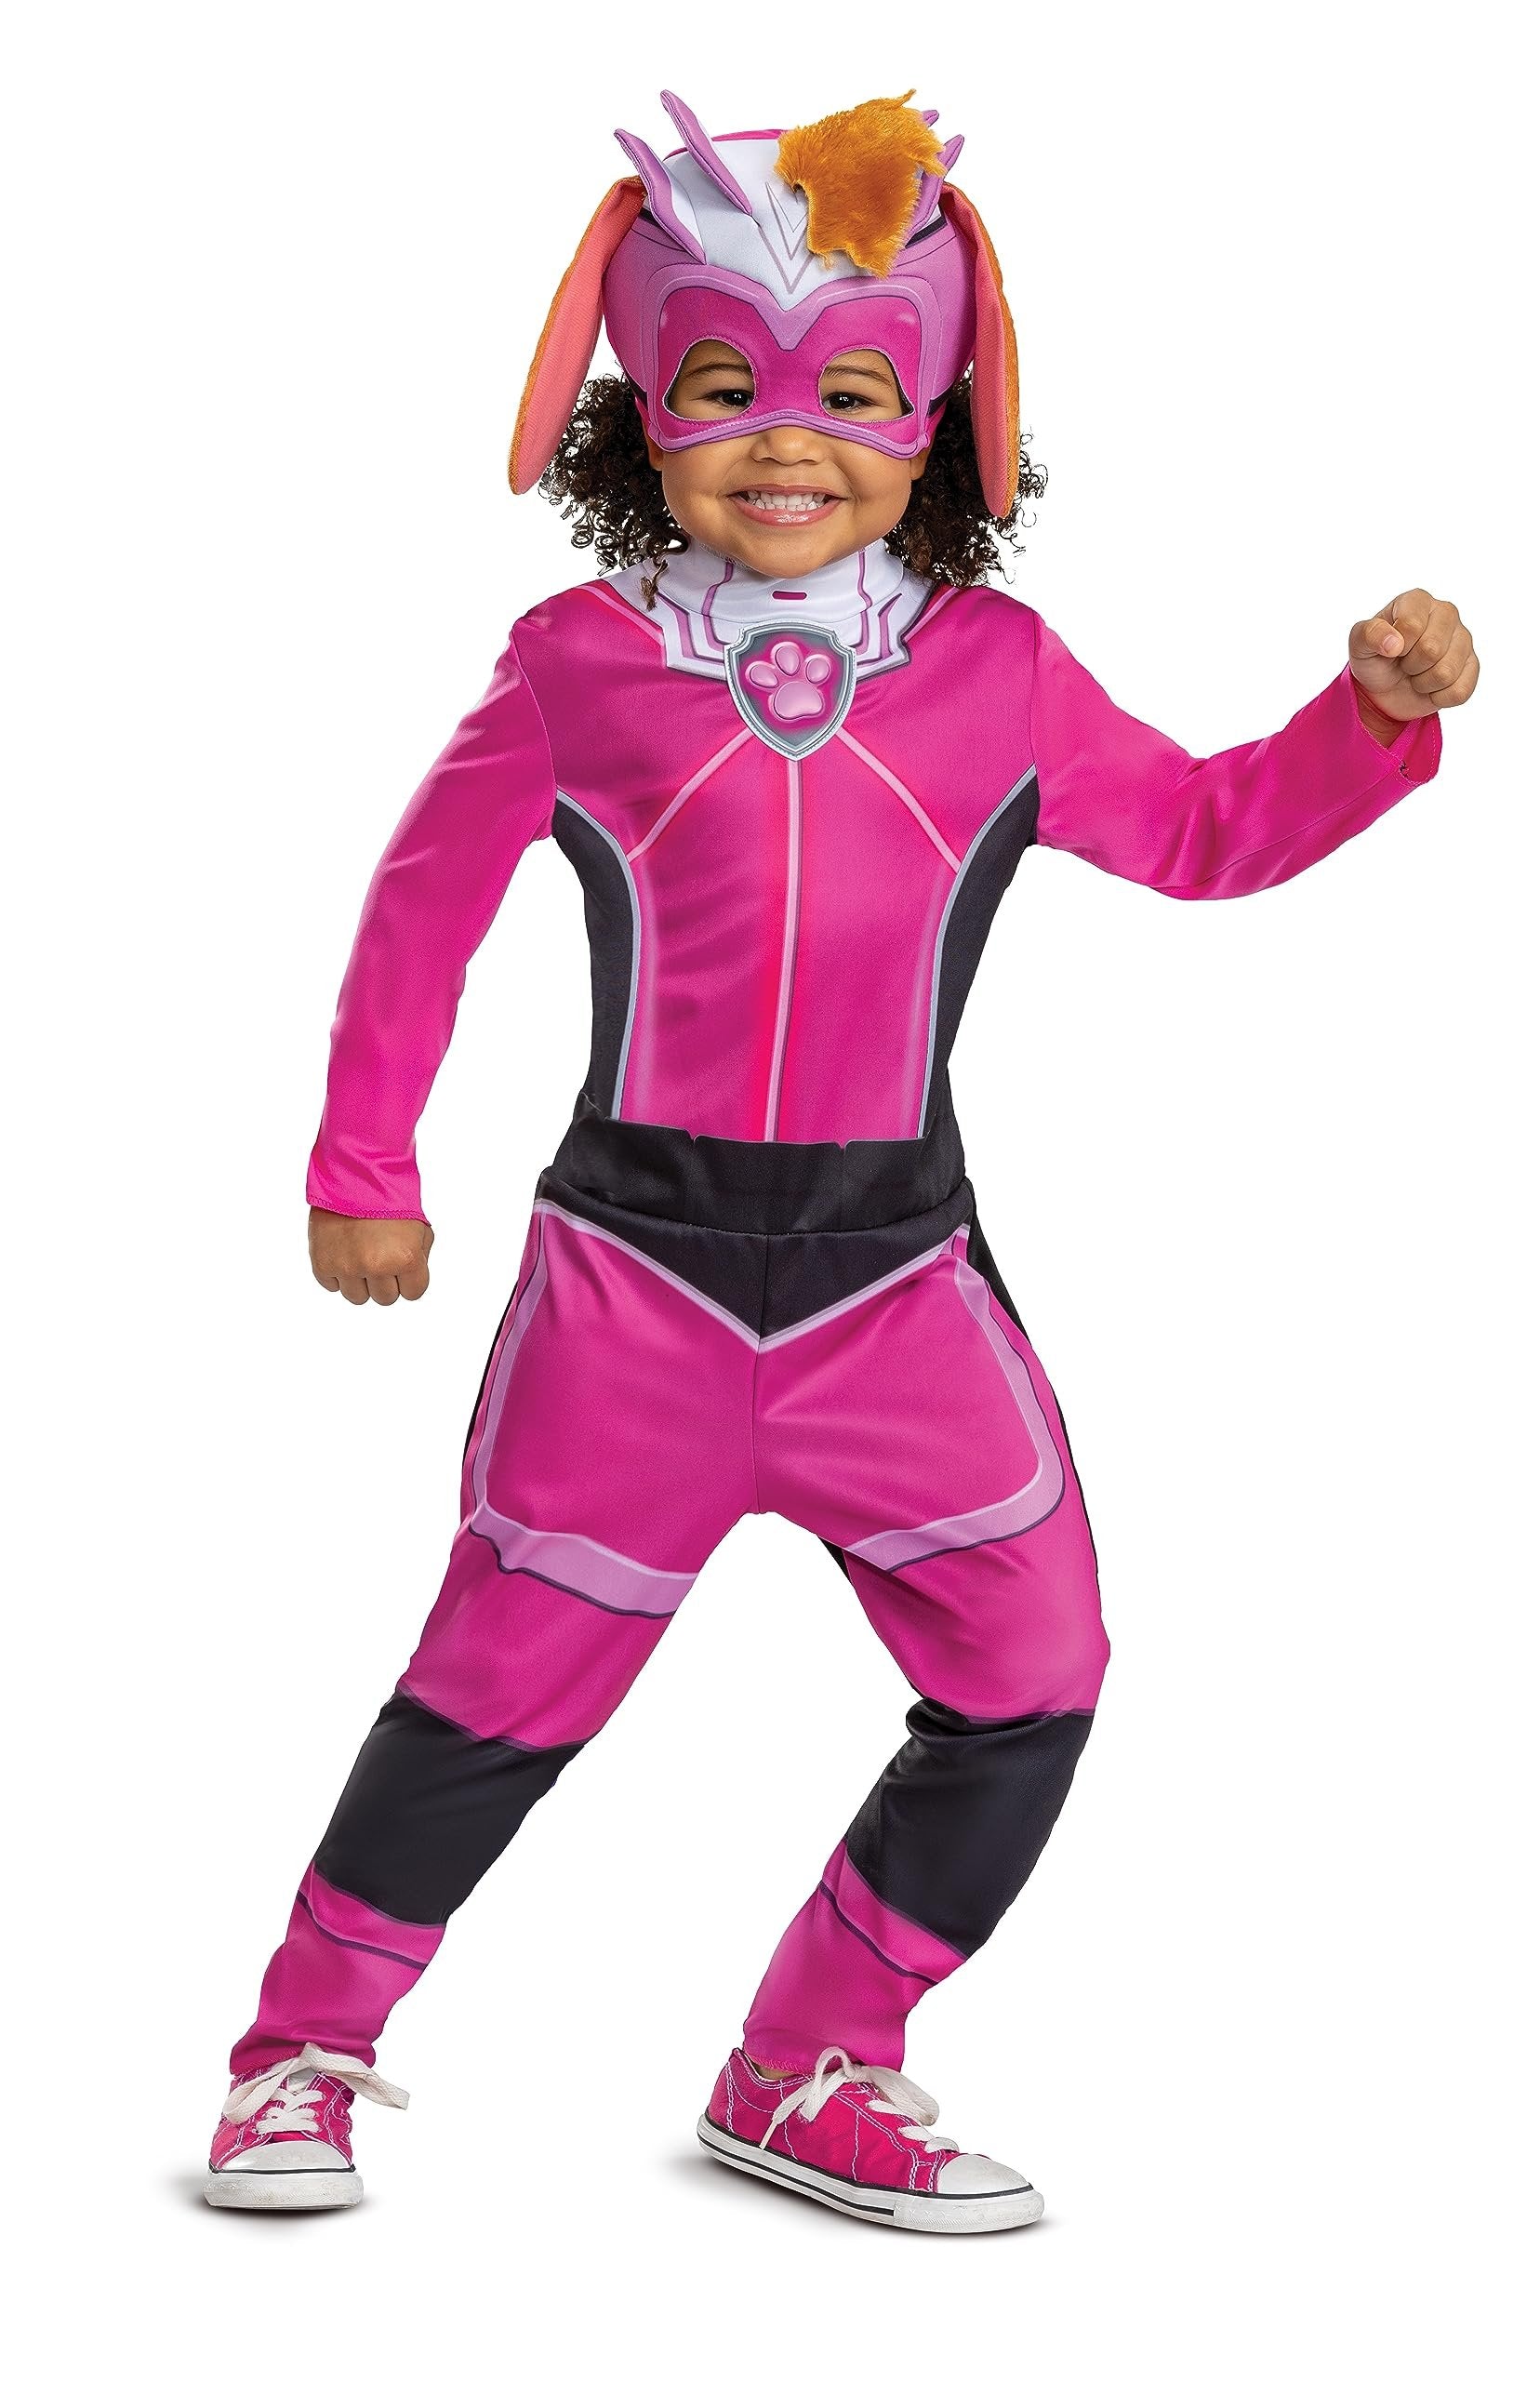 Skye Paw Patrol Costume, Official Paw Patrol Toddler Halloween Outfit with Headpiece for Kids, Size (2T)